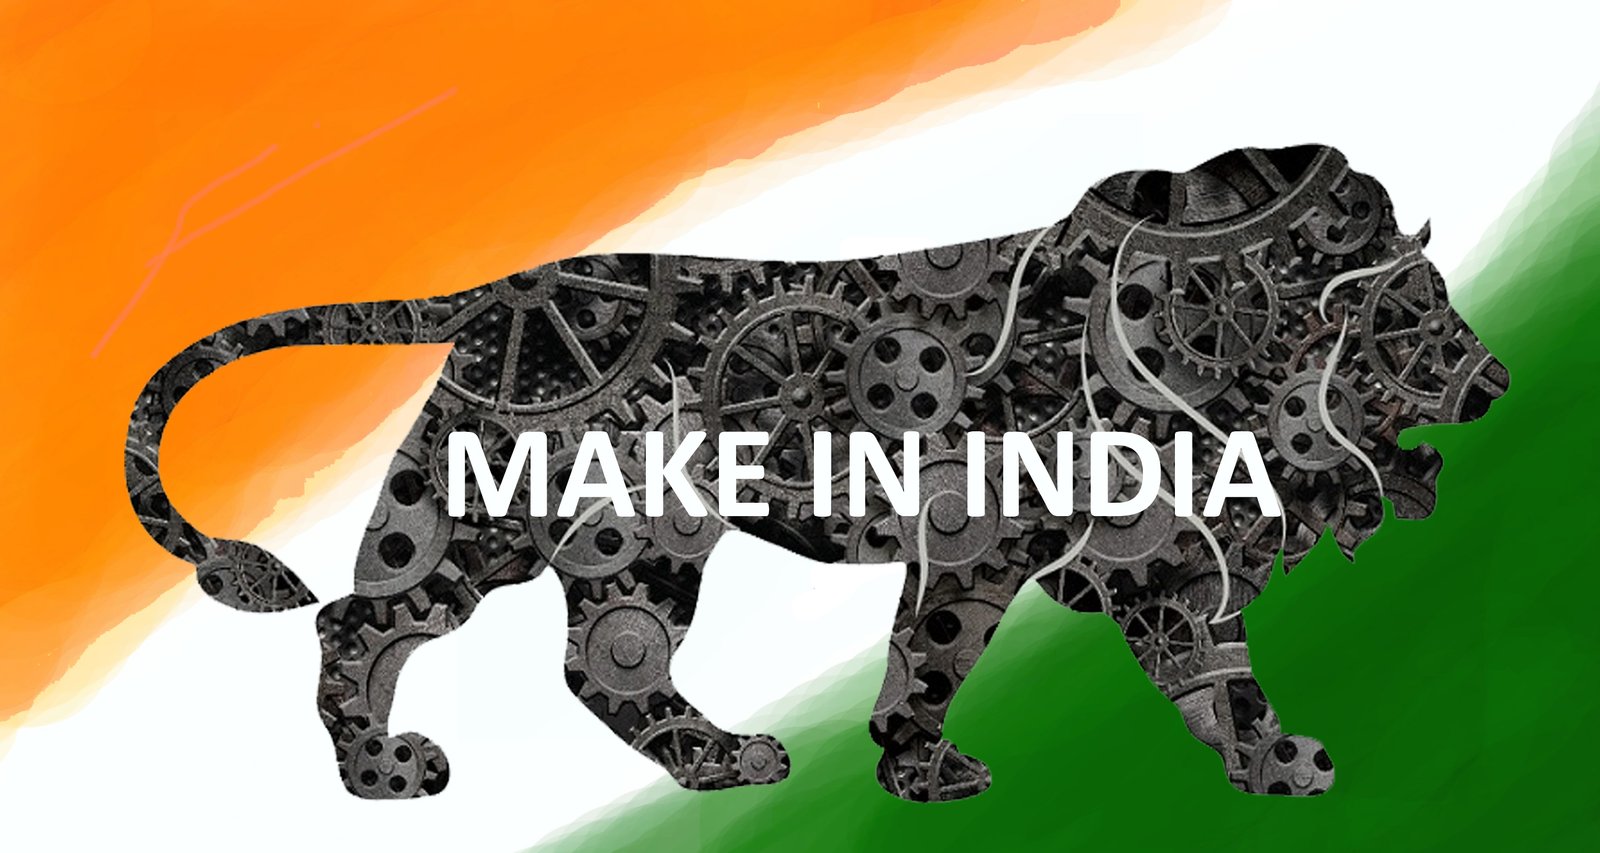 Need for Policy Change to Support the Domestic Insulator Industry In Line with the Make in India Initiative